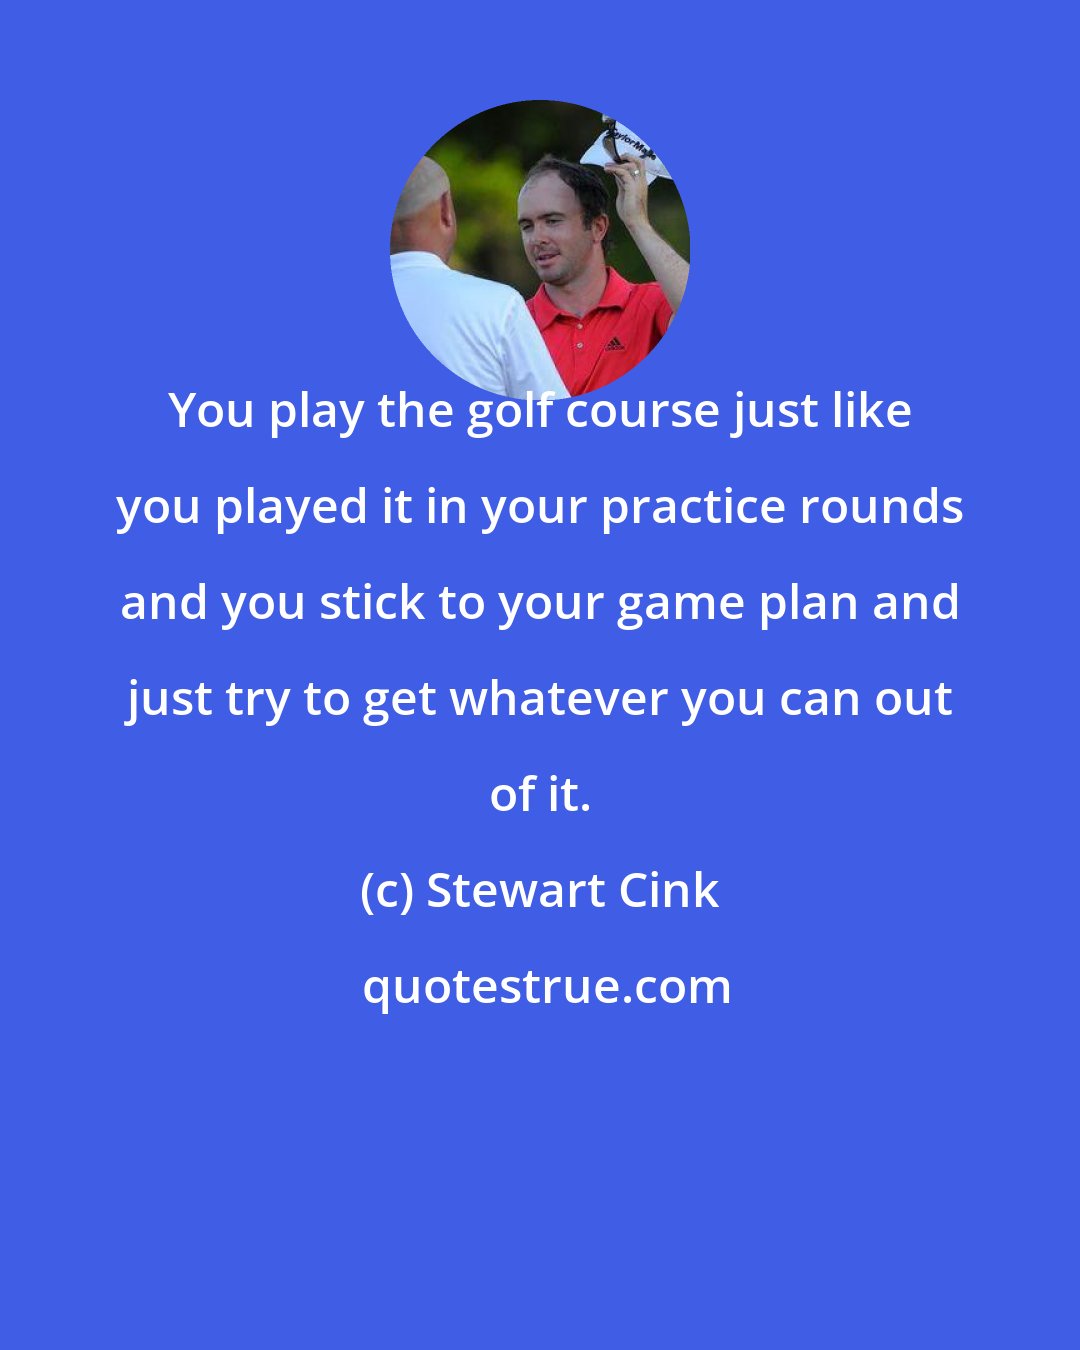 Stewart Cink: You play the golf course just like you played it in your practice rounds and you stick to your game plan and just try to get whatever you can out of it.